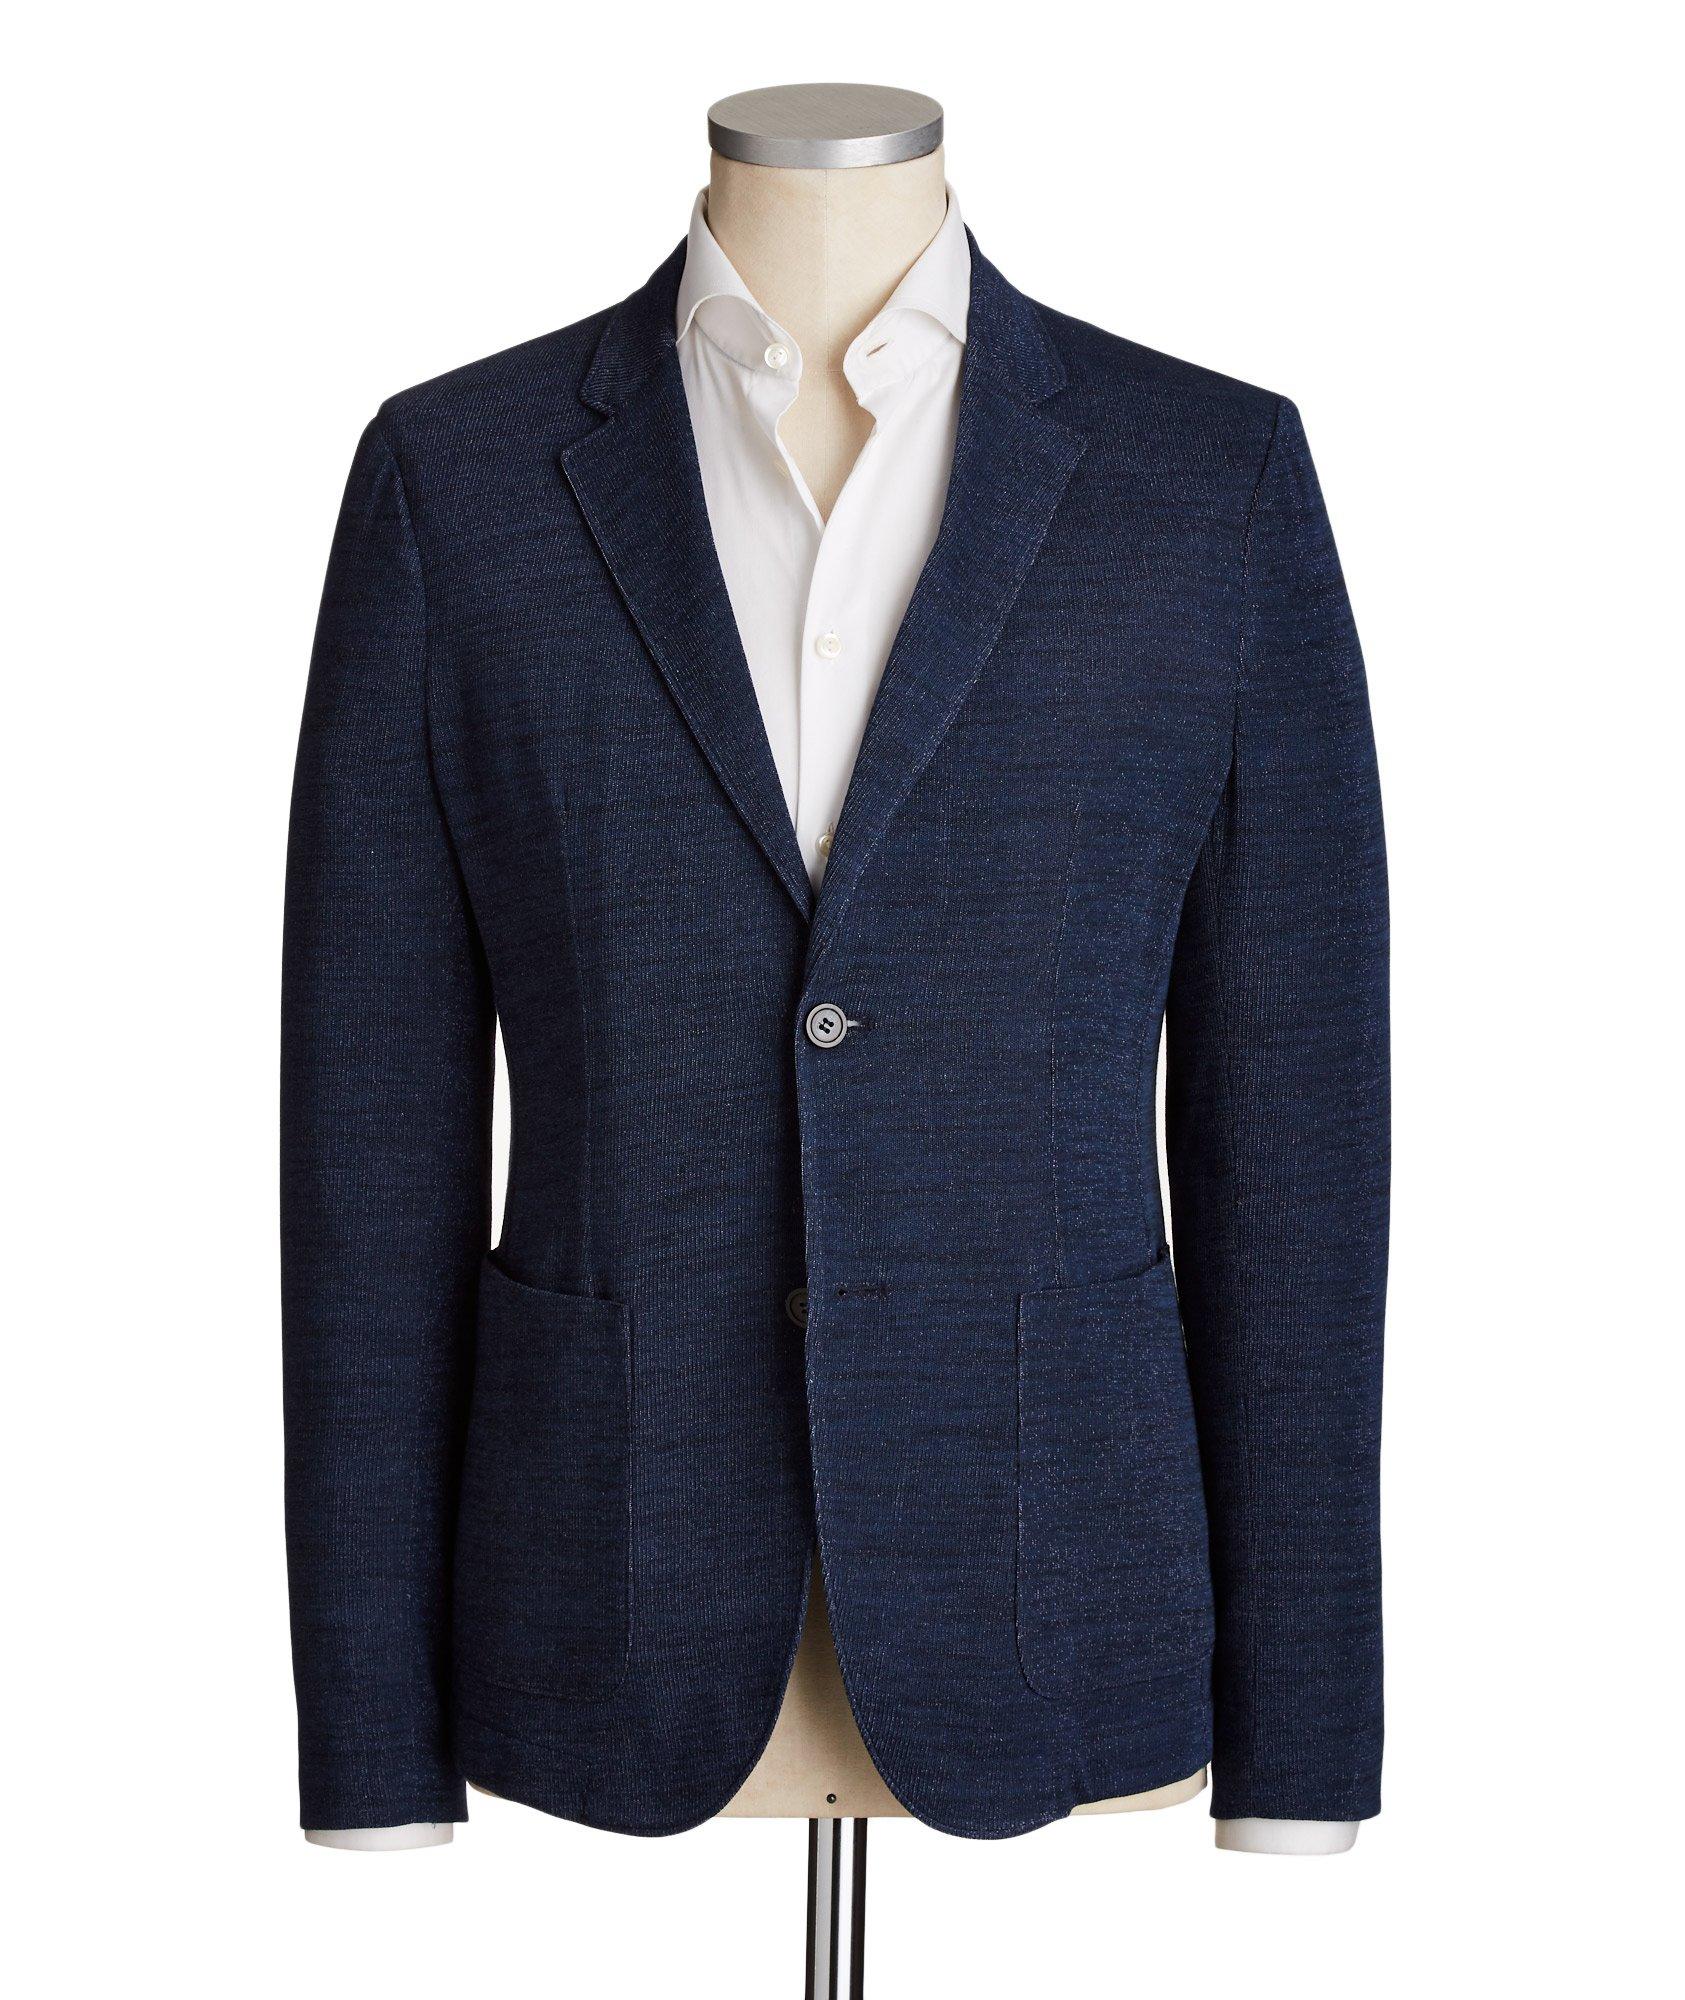 Unstructured Cotton Sports Jacket image 0